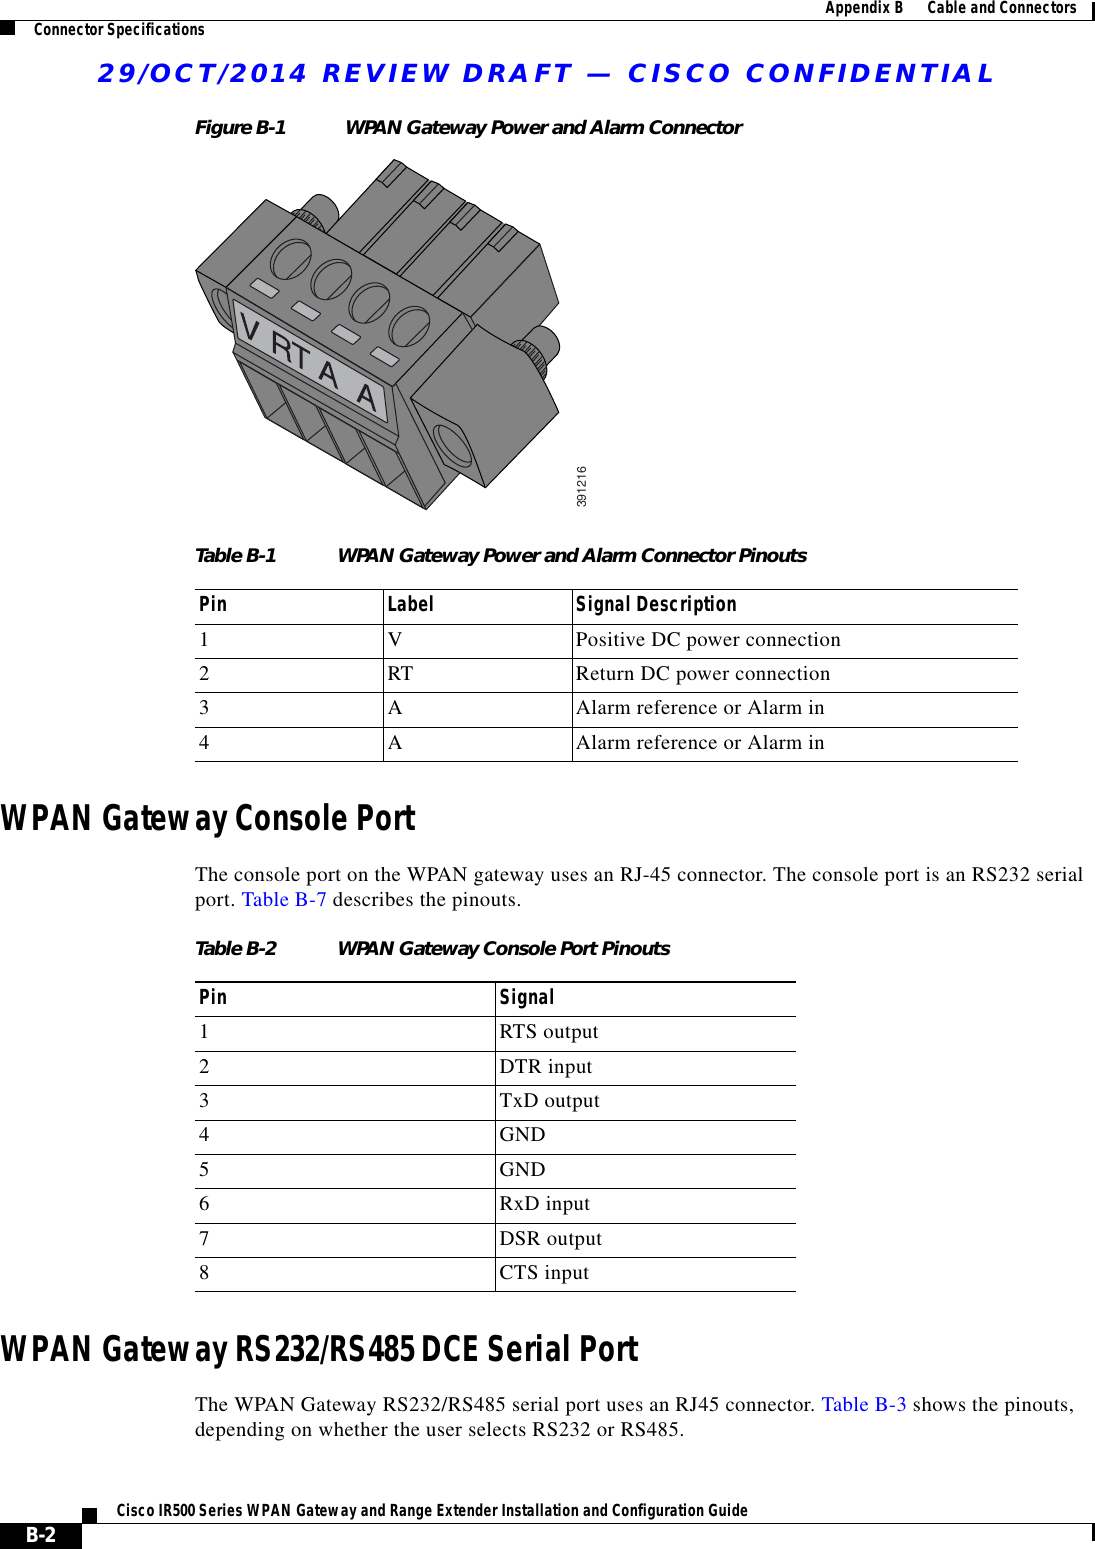 29/OCT/2014 REVIEW DRAFT — CISCO CONFIDENTIALB-2Cisco IR500 Series WPAN Gateway and Range Extender Installation and Configuration Guide  Appendix B      Cable and Connectors Connector SpecificationsFigure B-1 WPAN Gateway Power and Alarm Connector391216Table B-1 WPAN Gateway Power and Alarm Connector Pinouts Pin Label Signal Description1 V Positive DC power connection2RT Return DC power connection3 A Alarm reference or Alarm in4 A Alarm reference or Alarm inWPAN Gateway Console PortThe console port on the WPAN gateway uses an RJ-45 connector. The console port is an RS232 serial port. Table B-7 describes the pinouts.Table B-2 WPAN Gateway Console Port Pinouts Pin Signal1RTS output2DTR input3TxD output4GND5GND6RxD input7DSR output8CTS inputWPAN Gateway RS232/RS485 DCE Serial PortThe WPAN Gateway RS232/RS485 serial port uses an RJ45 connector. Table B-3 shows the pinouts, depending on whether the user selects RS232 or RS485.